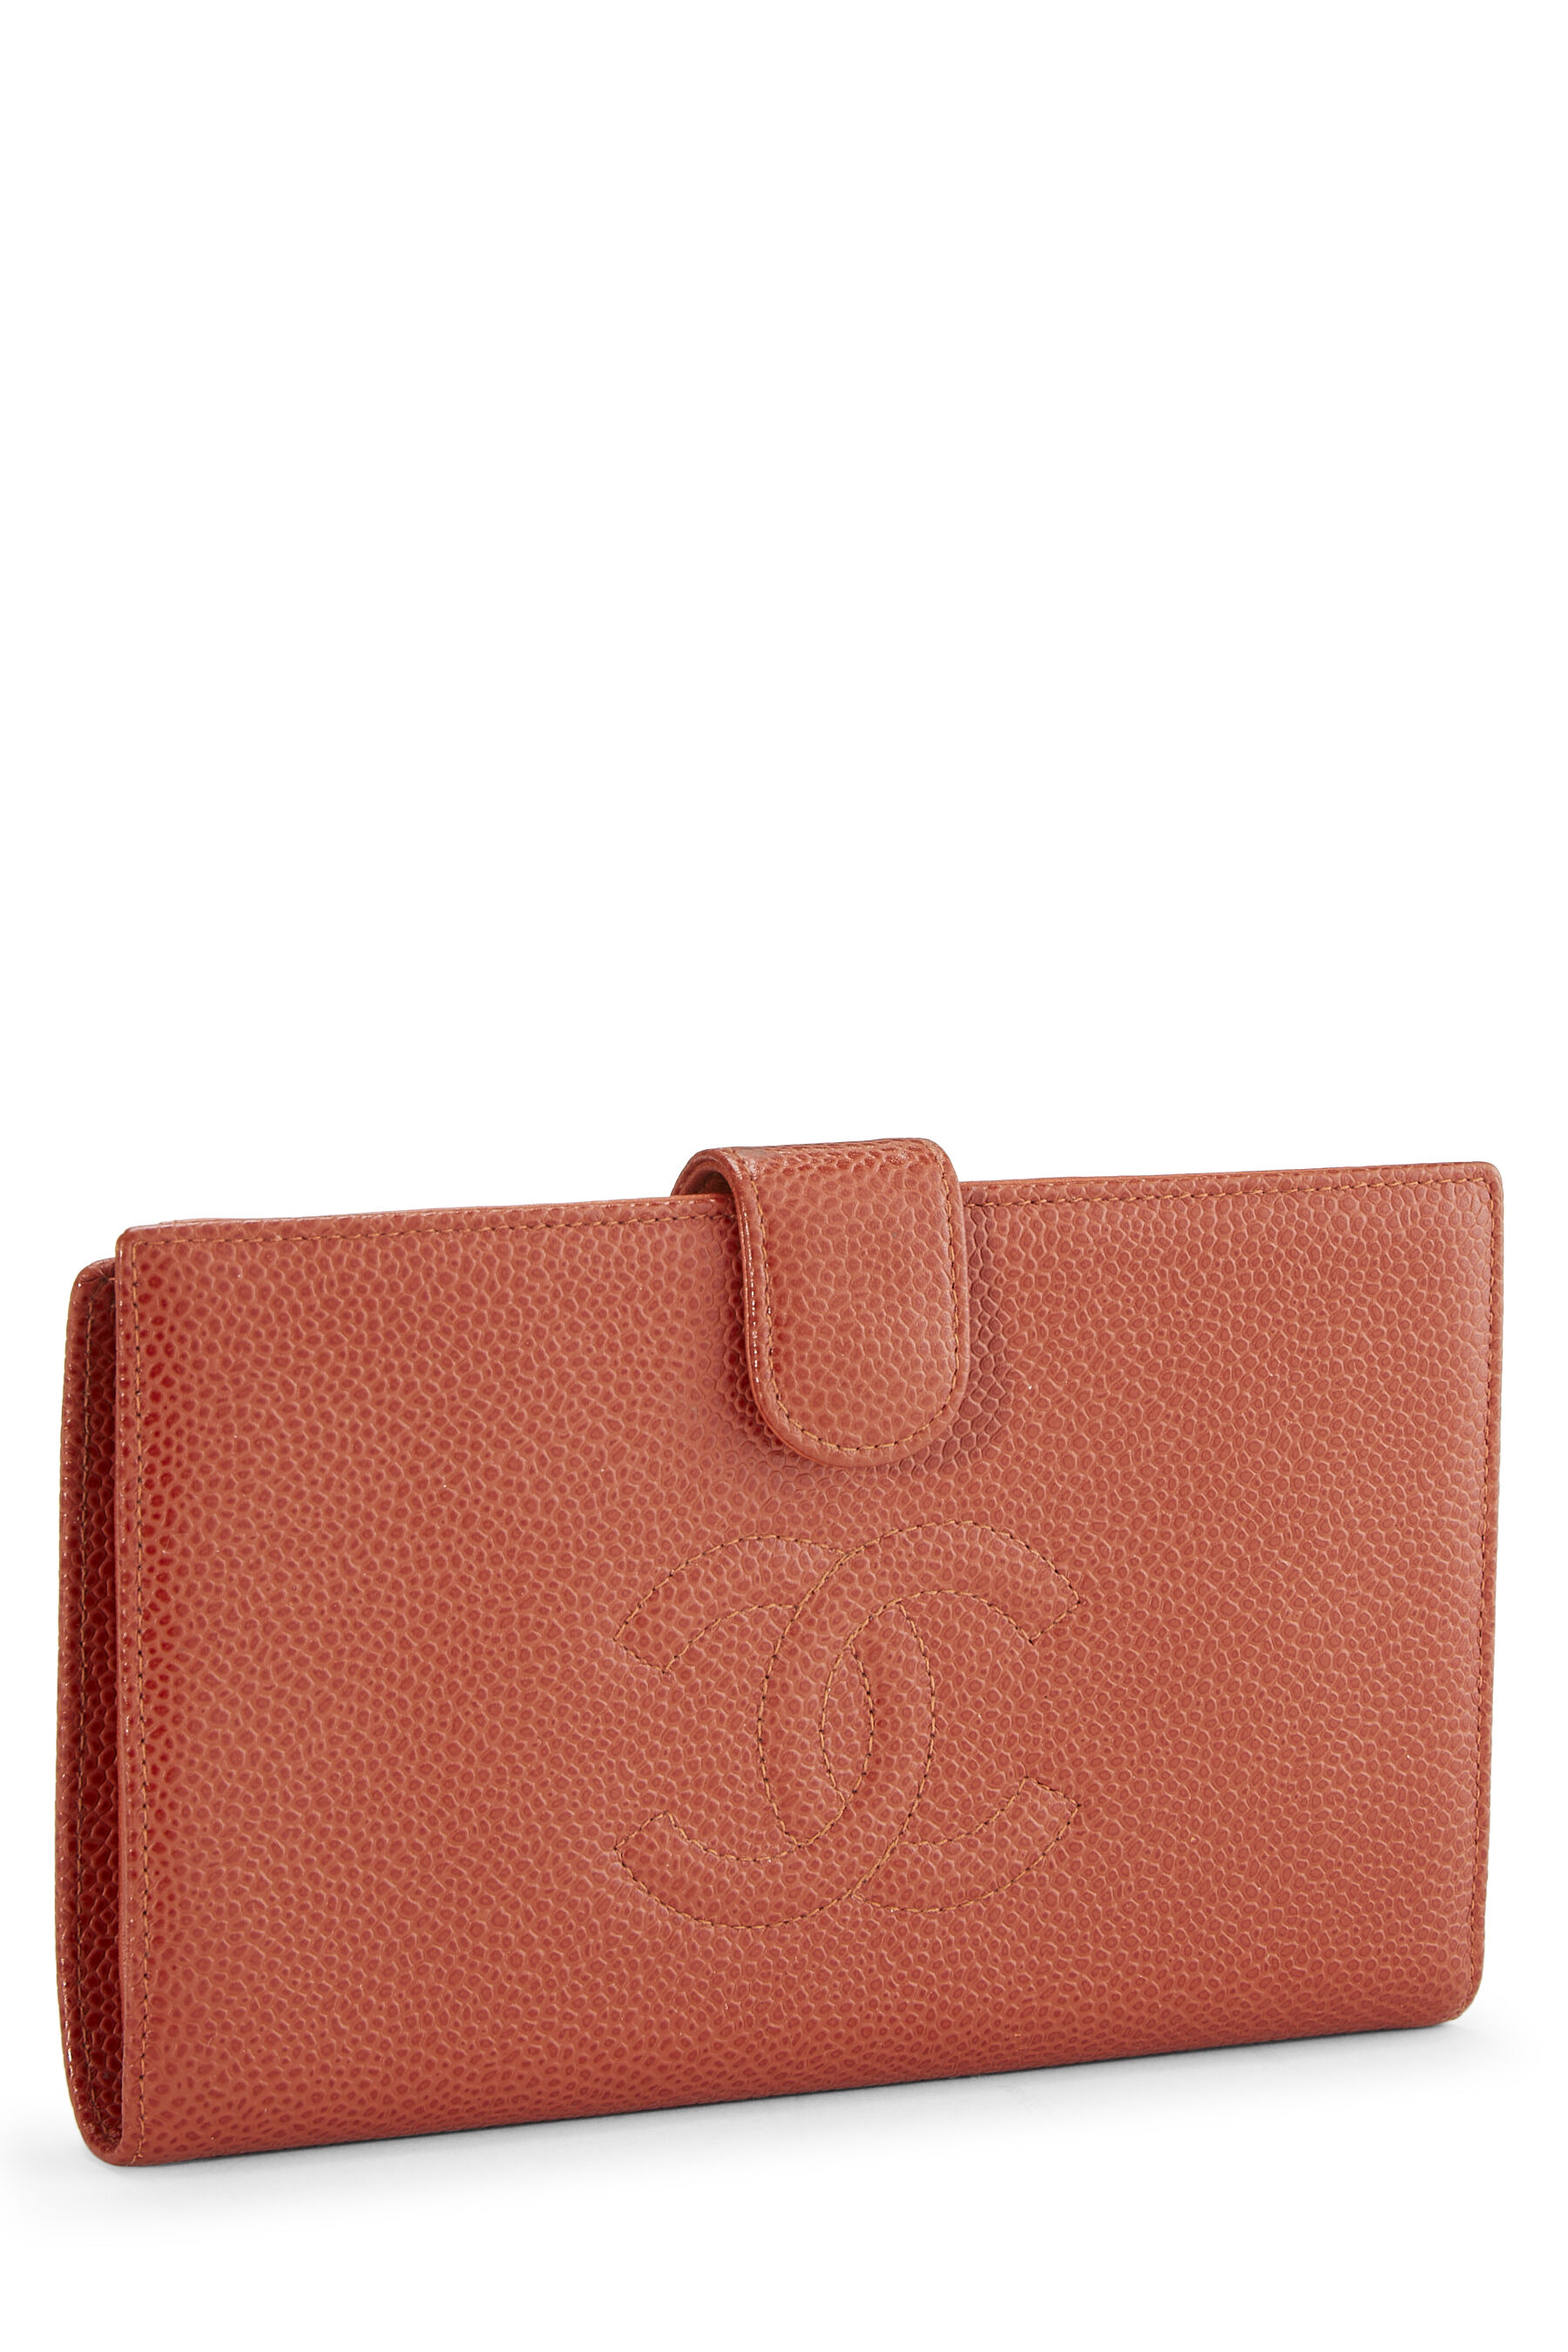 Leather wallet Chanel Orange in Leather - 35807148